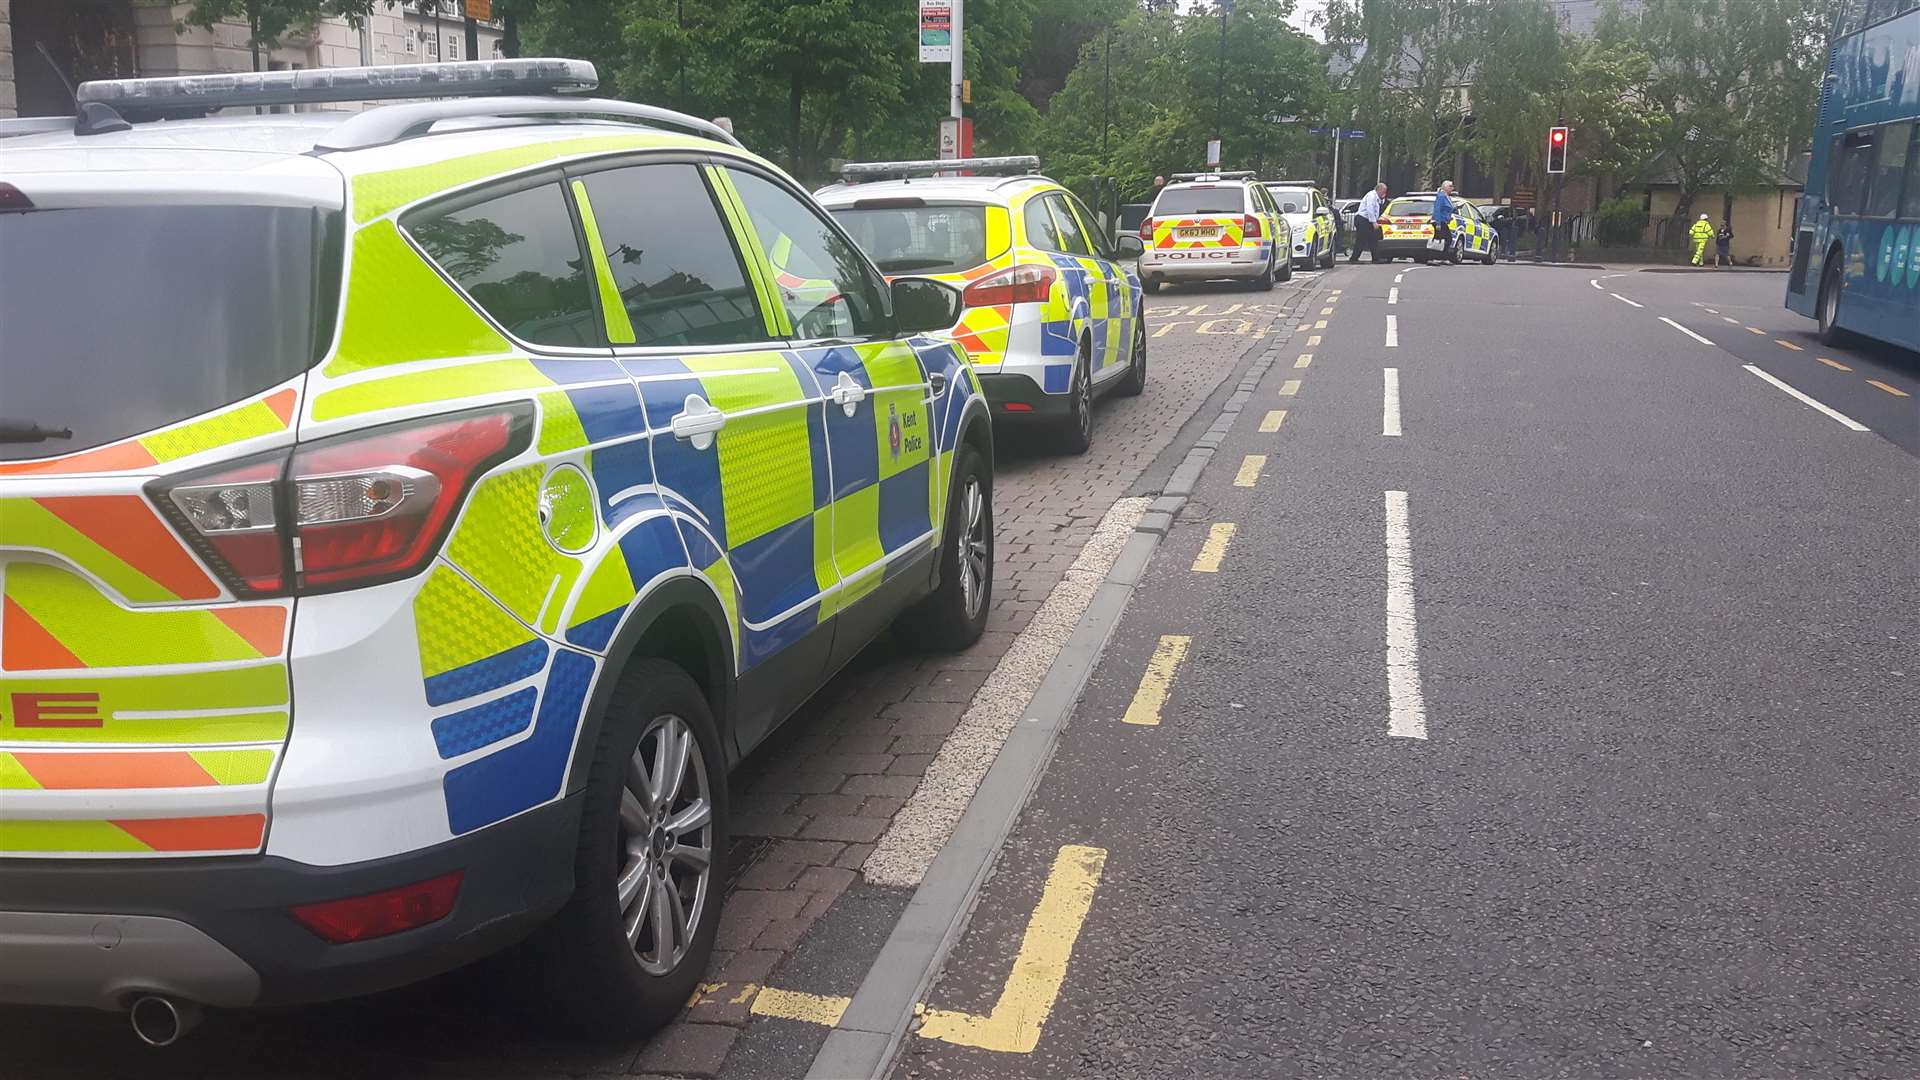 Police at the scene of an assault outside County Hall in Maidstone